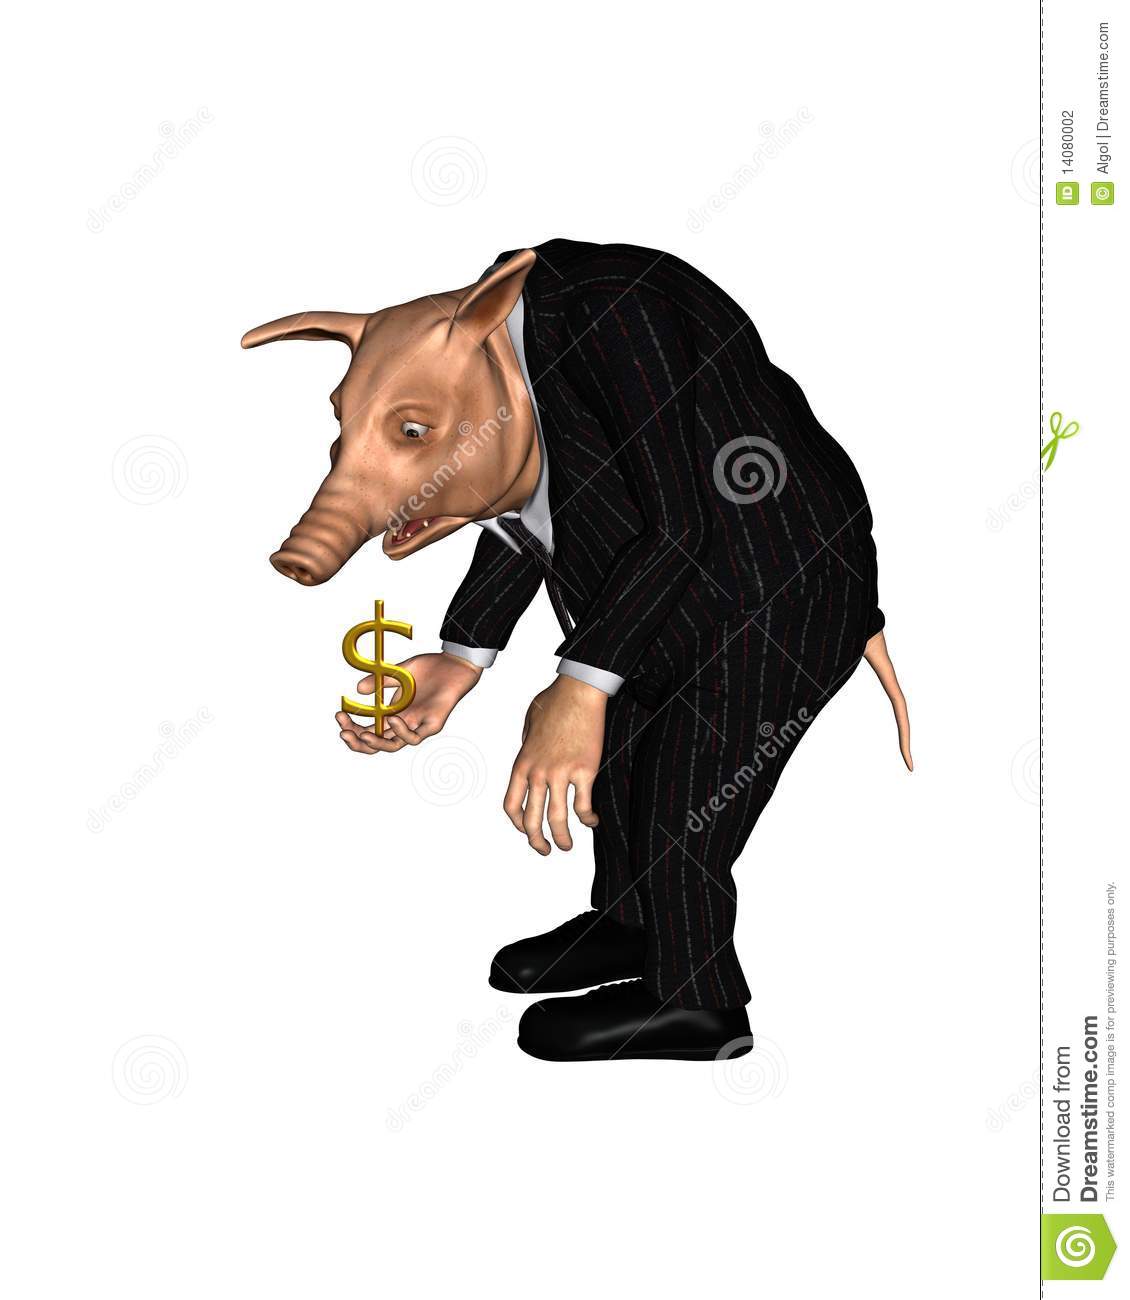 3d Digital Render Of A Pig Dressed As A Business Man With A Worried    